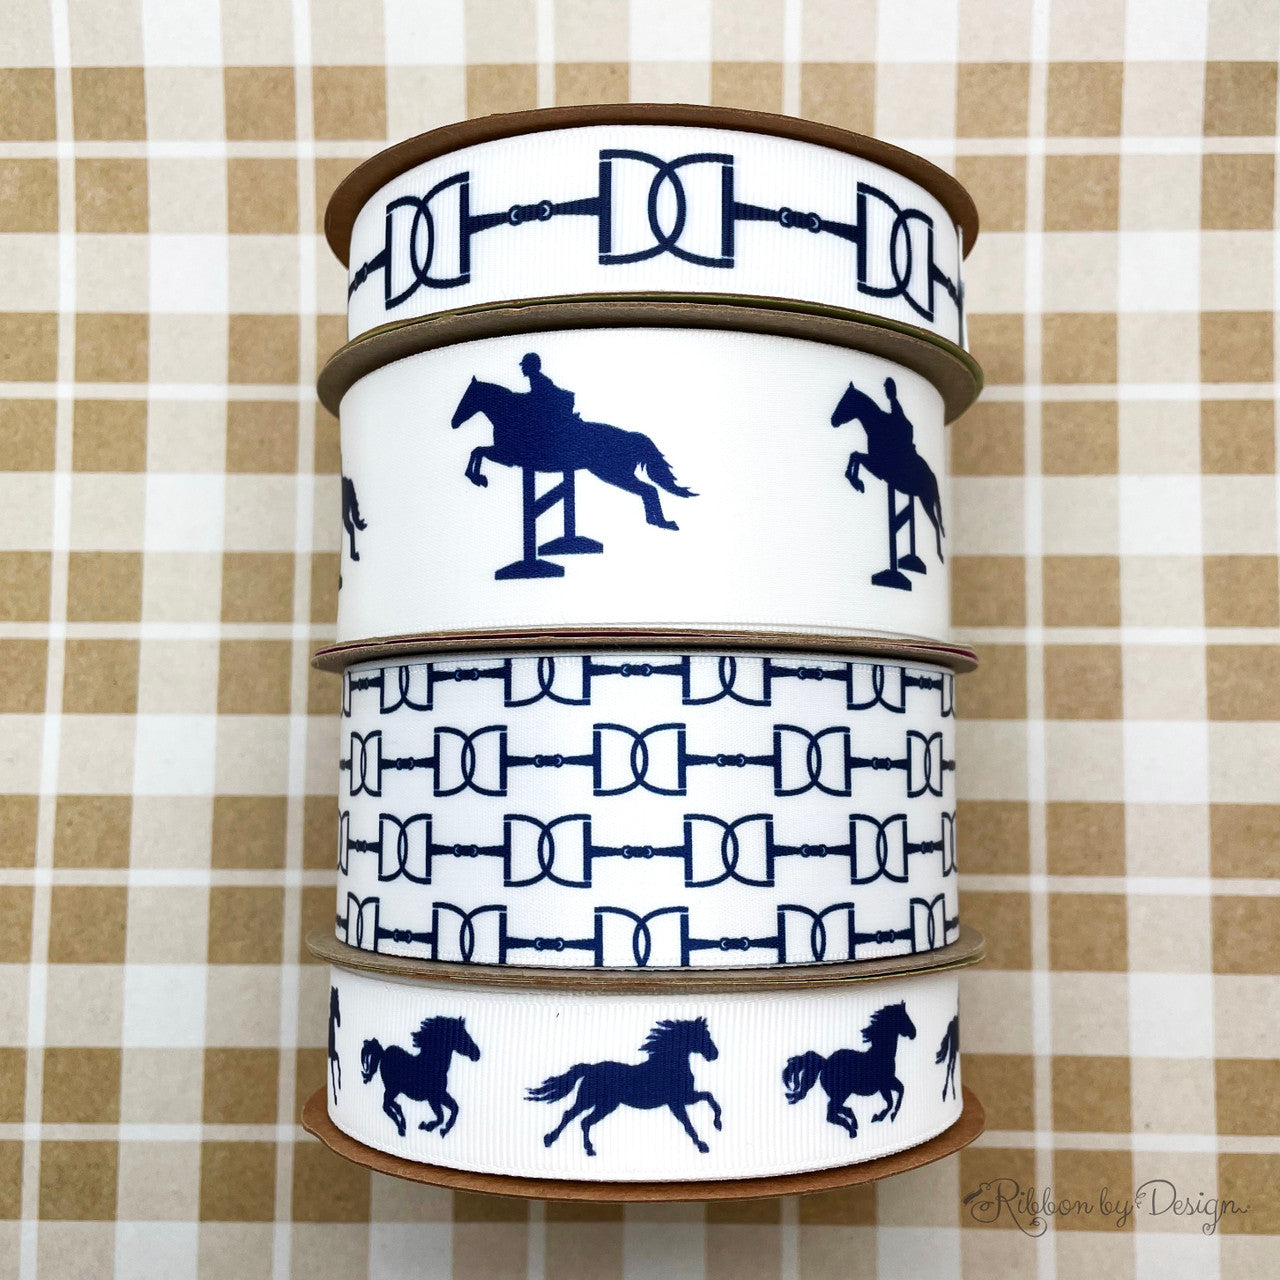 We have a wonderful collection of Equestrian themed ribbons. There is something for everyone!